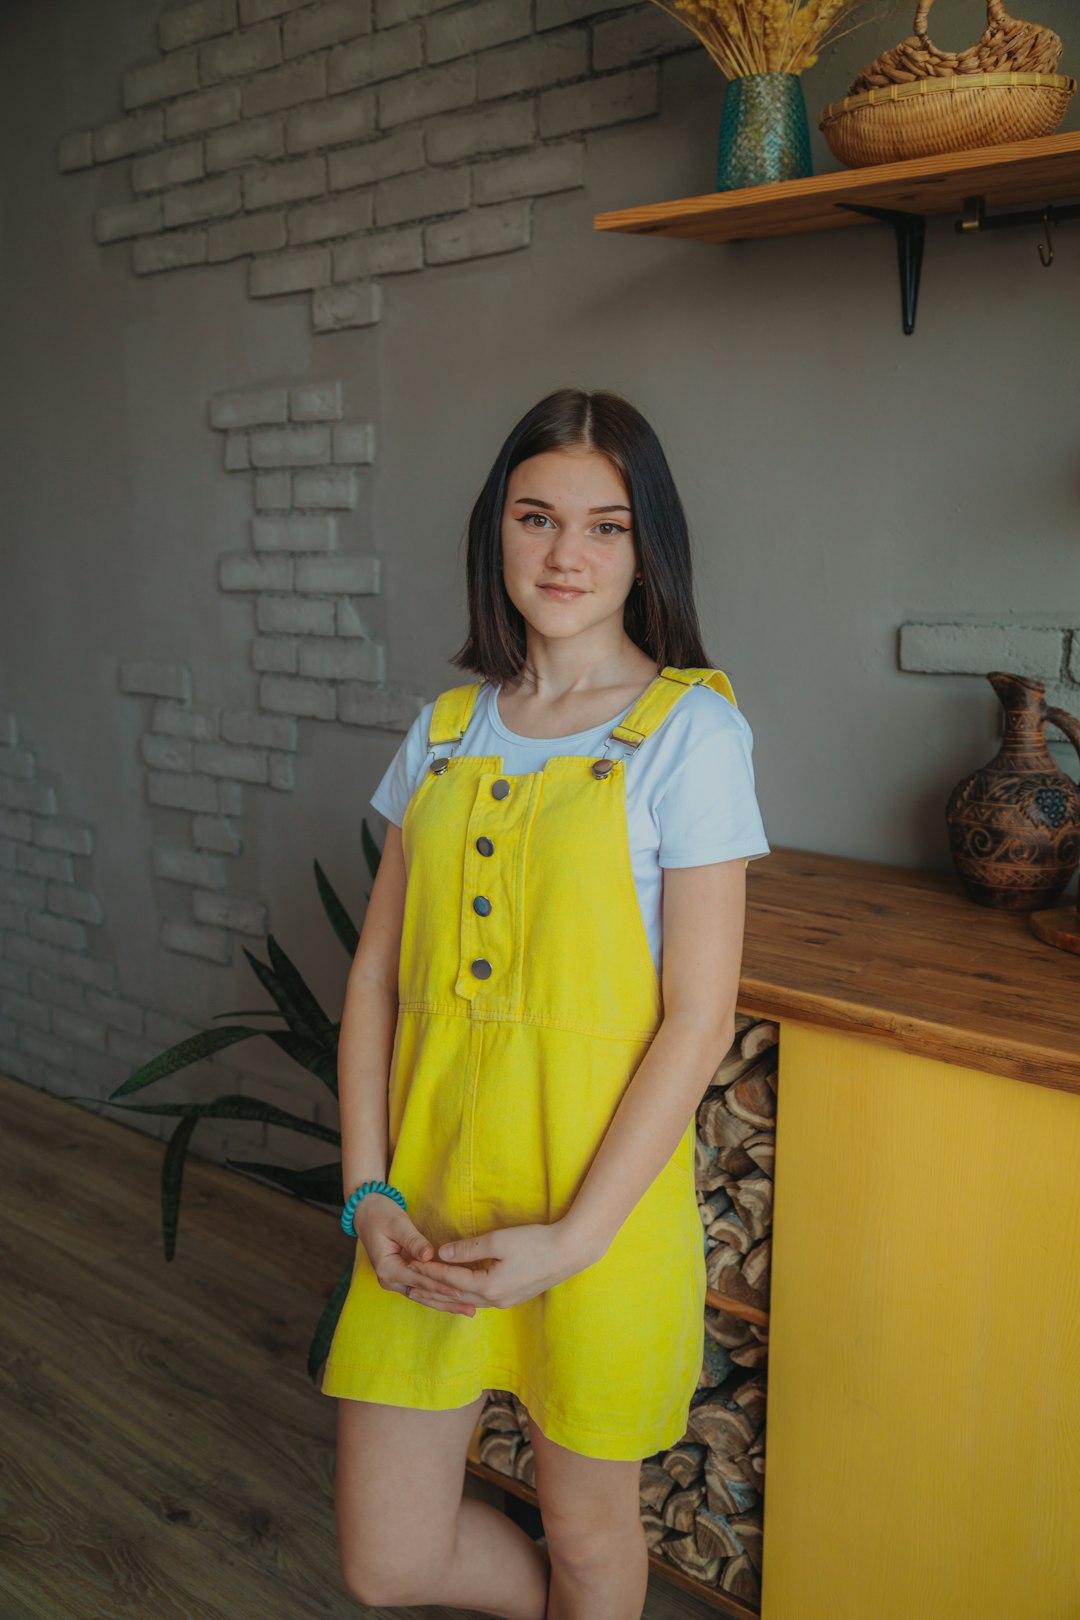 girl in blue and yellow school uniform standing near brown wooden table